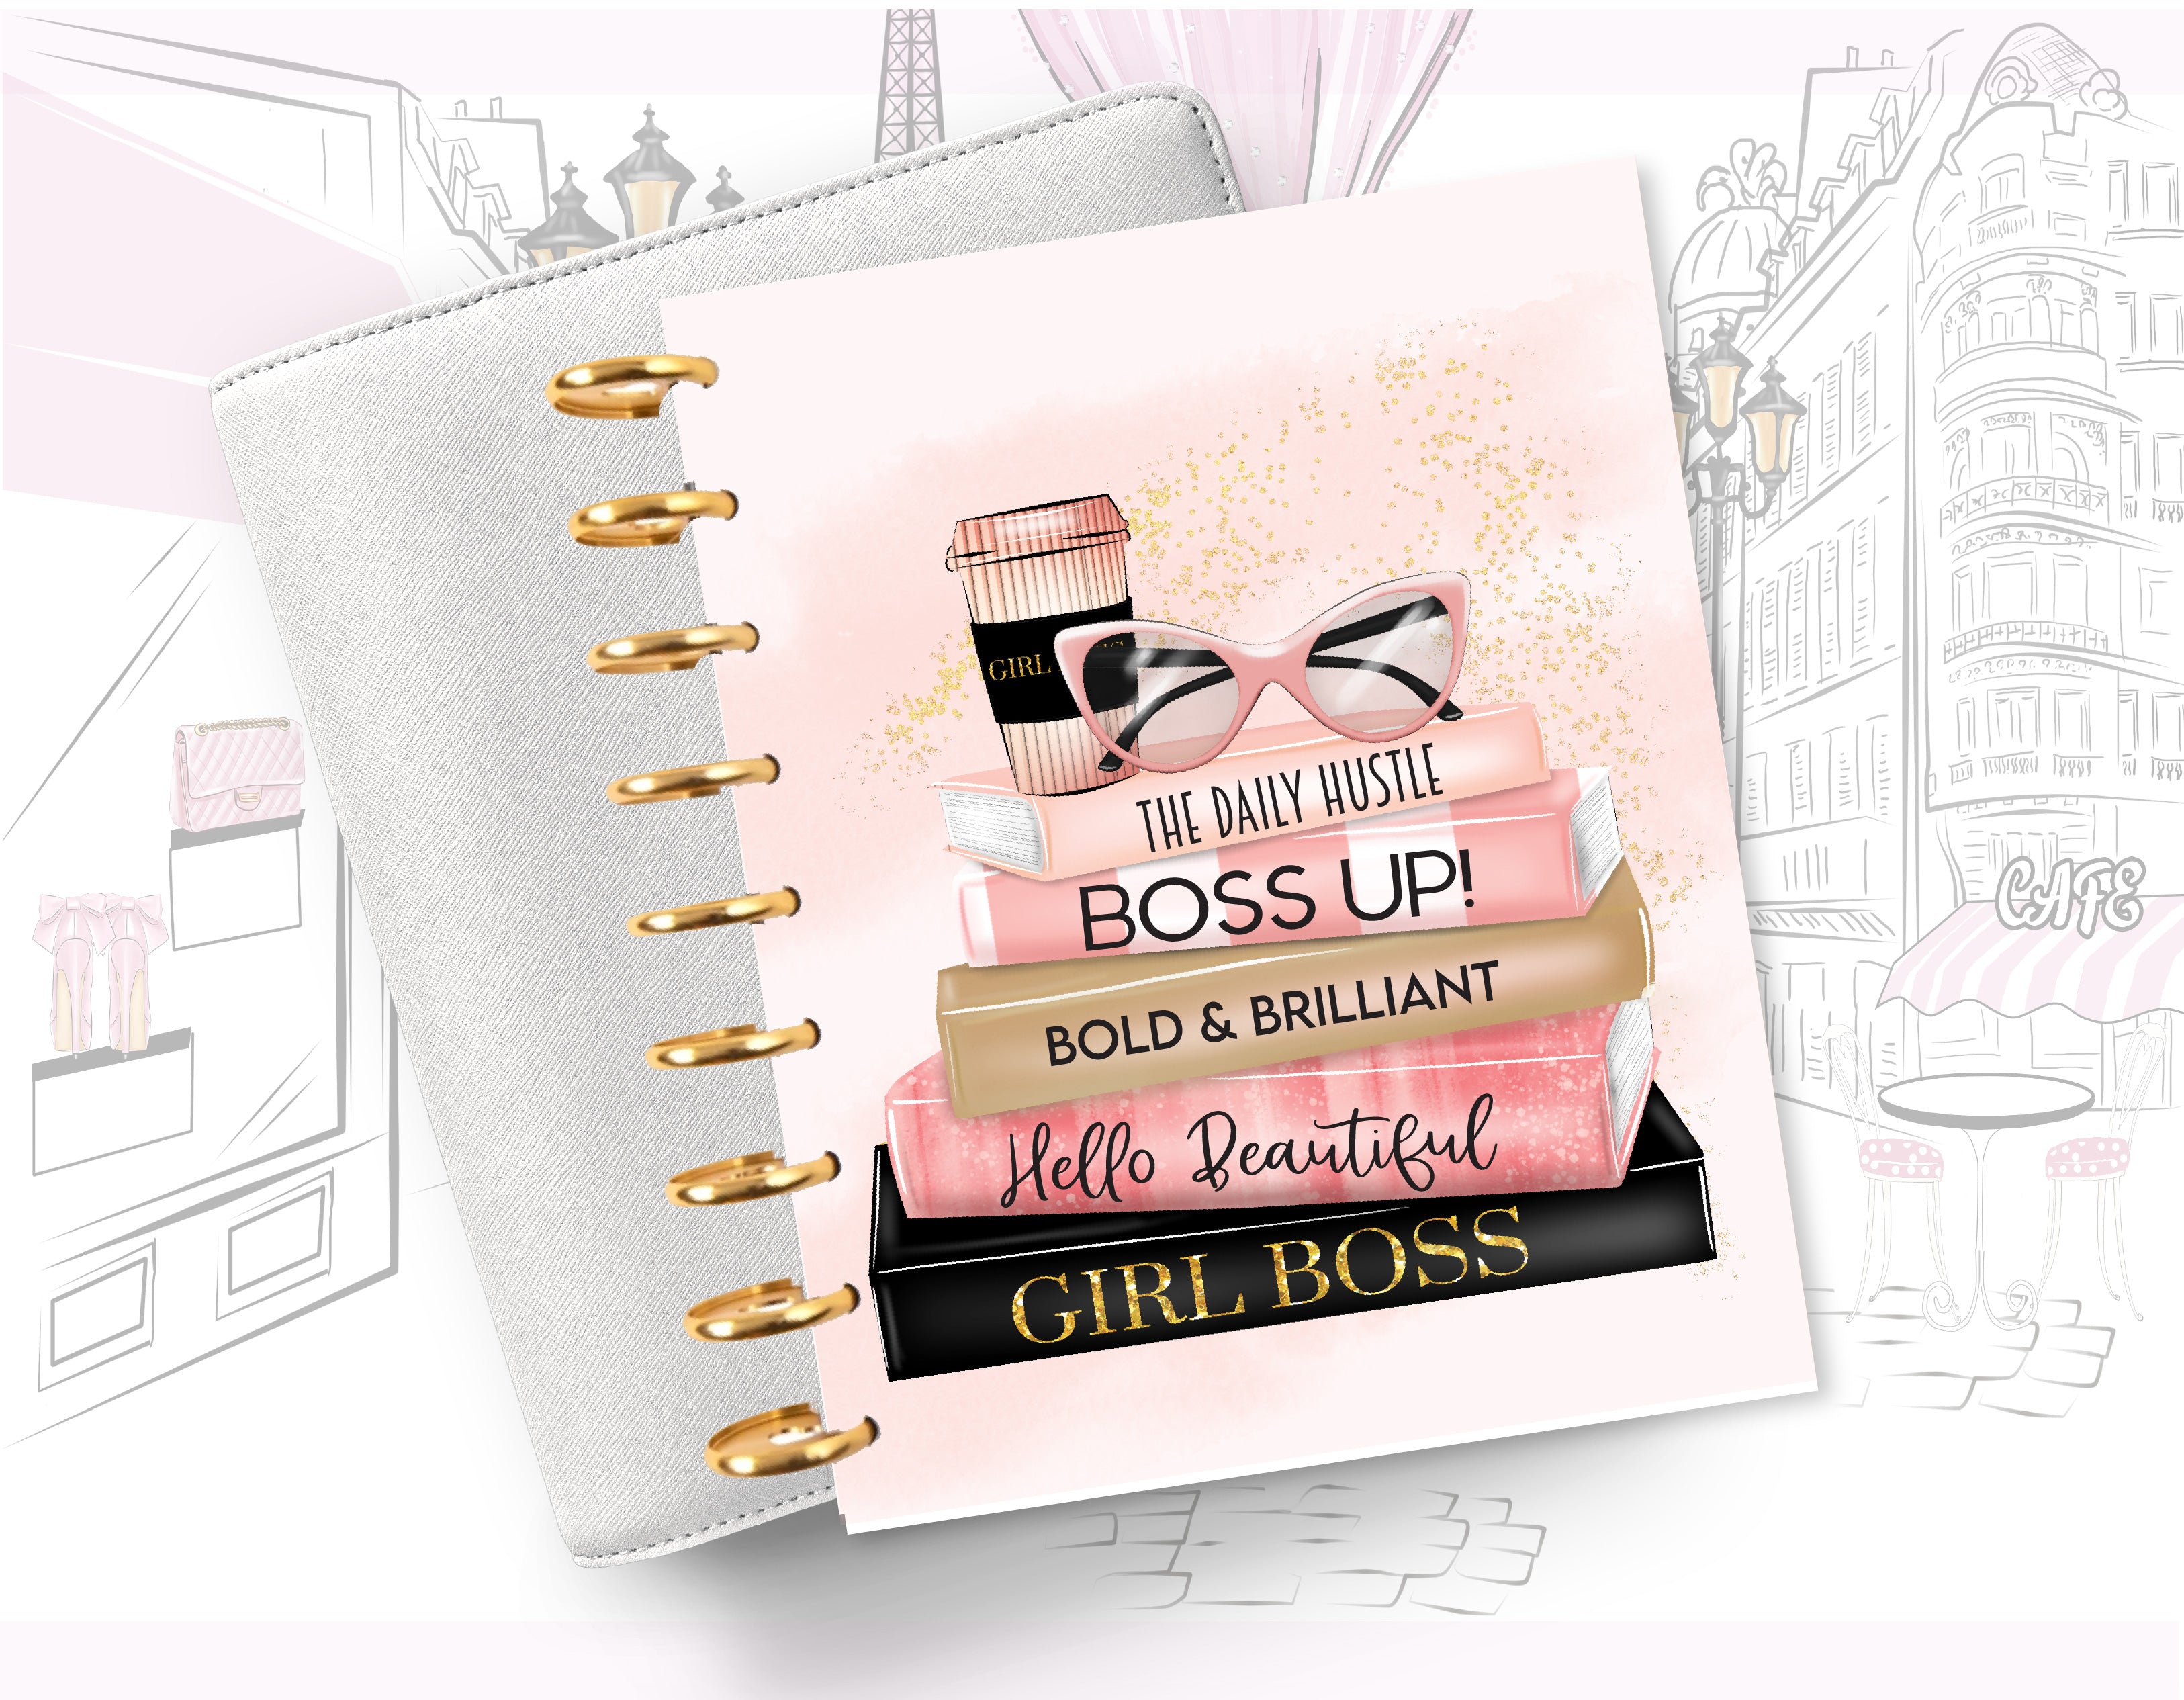 Fashion Style Girl Agenda Insert Dashboard or Cover Set for 